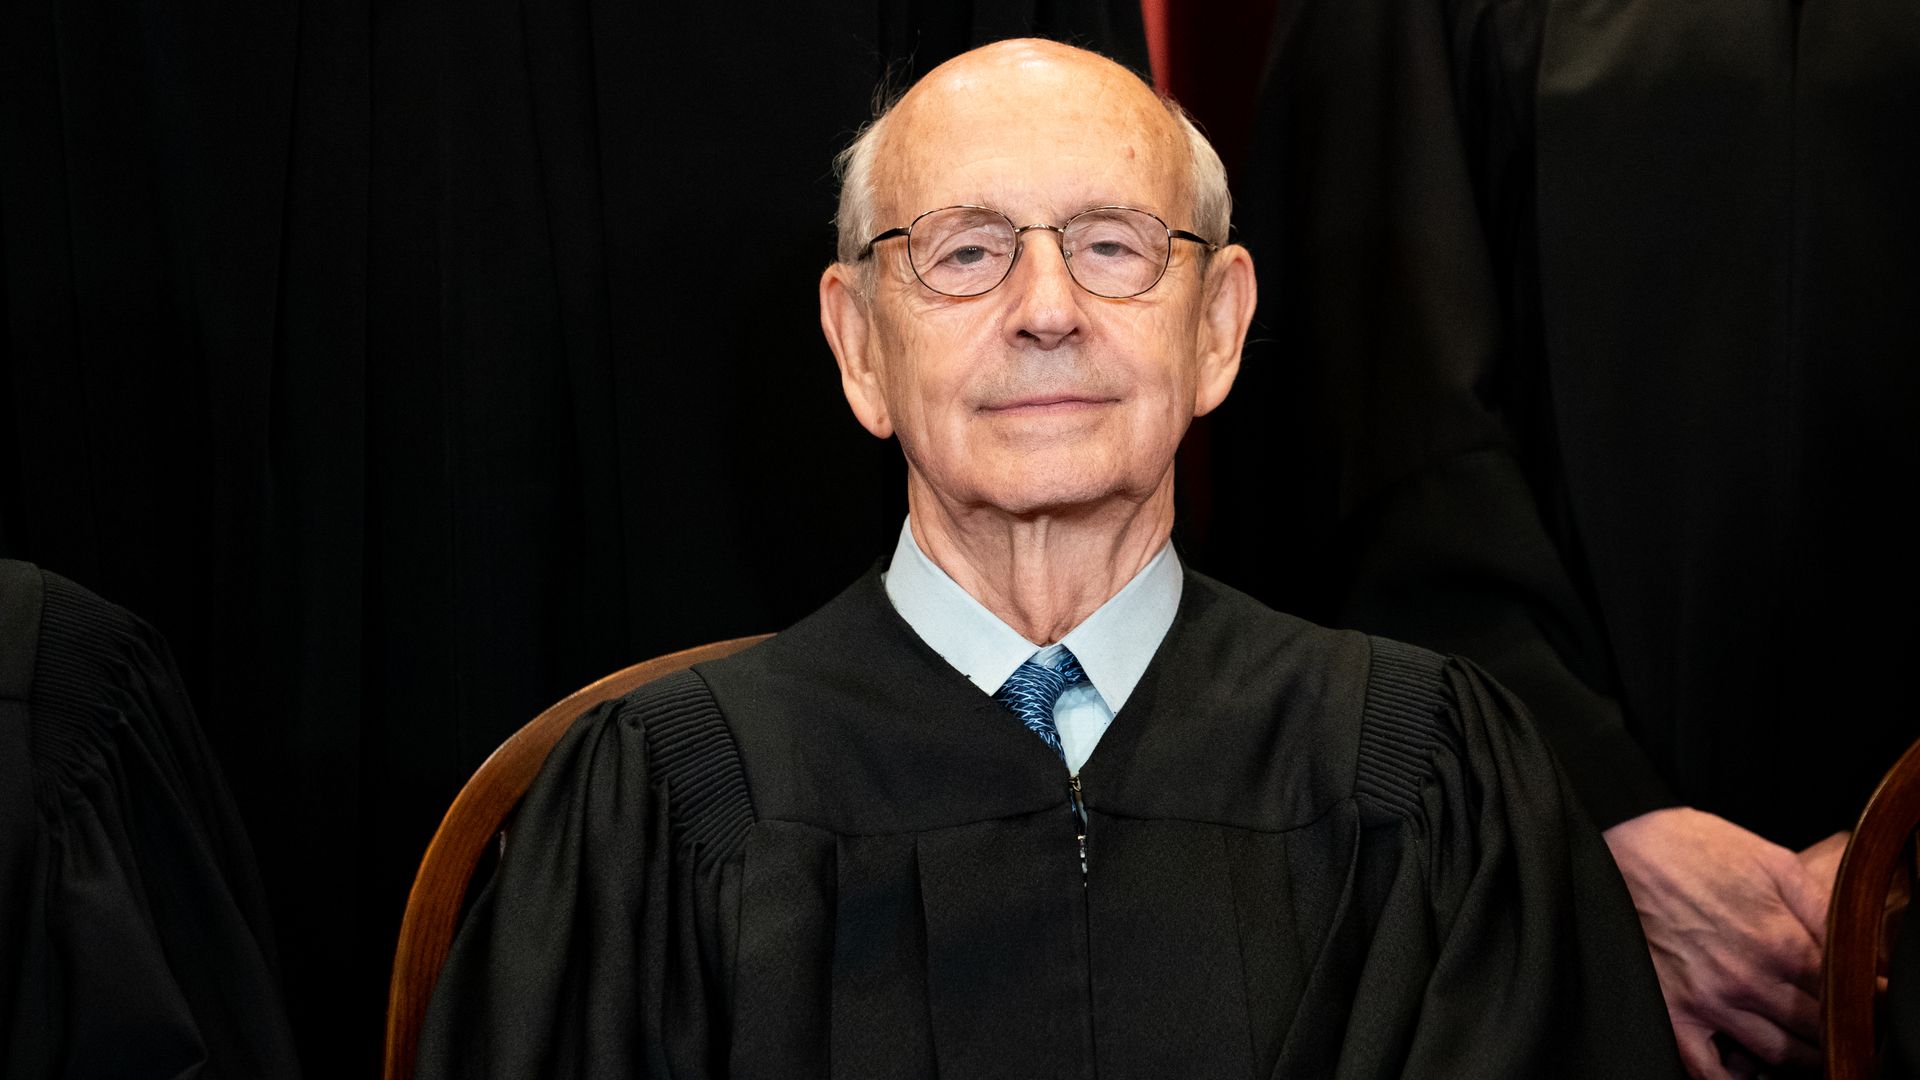 A close-up of Supreme Court Justice Stephen Breyer in black robe posing as part of a formal group photo